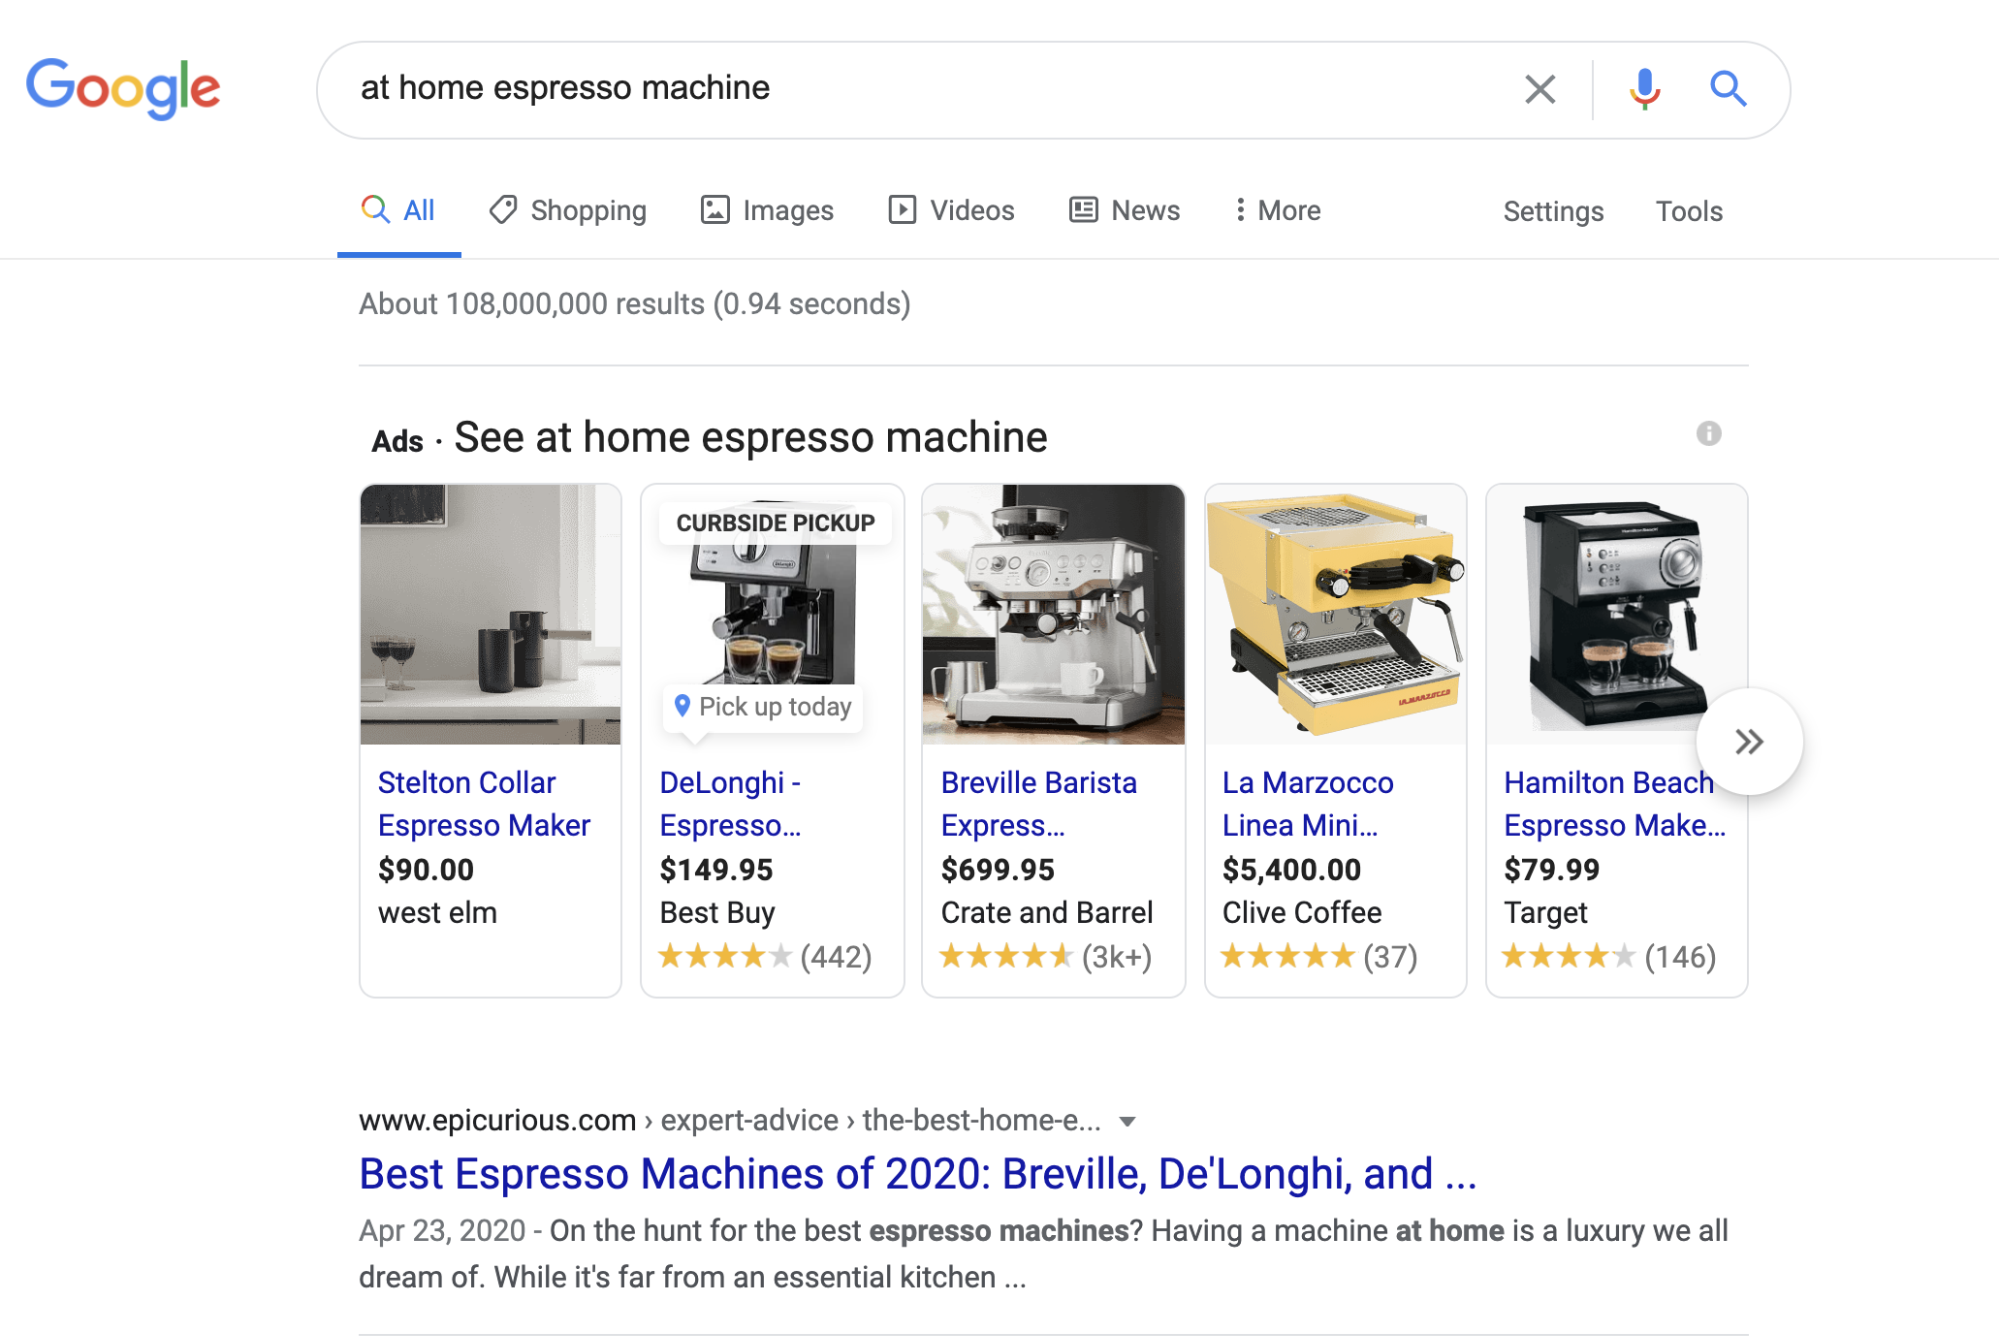 Paid placements only Shopping Ads appear in Google listings